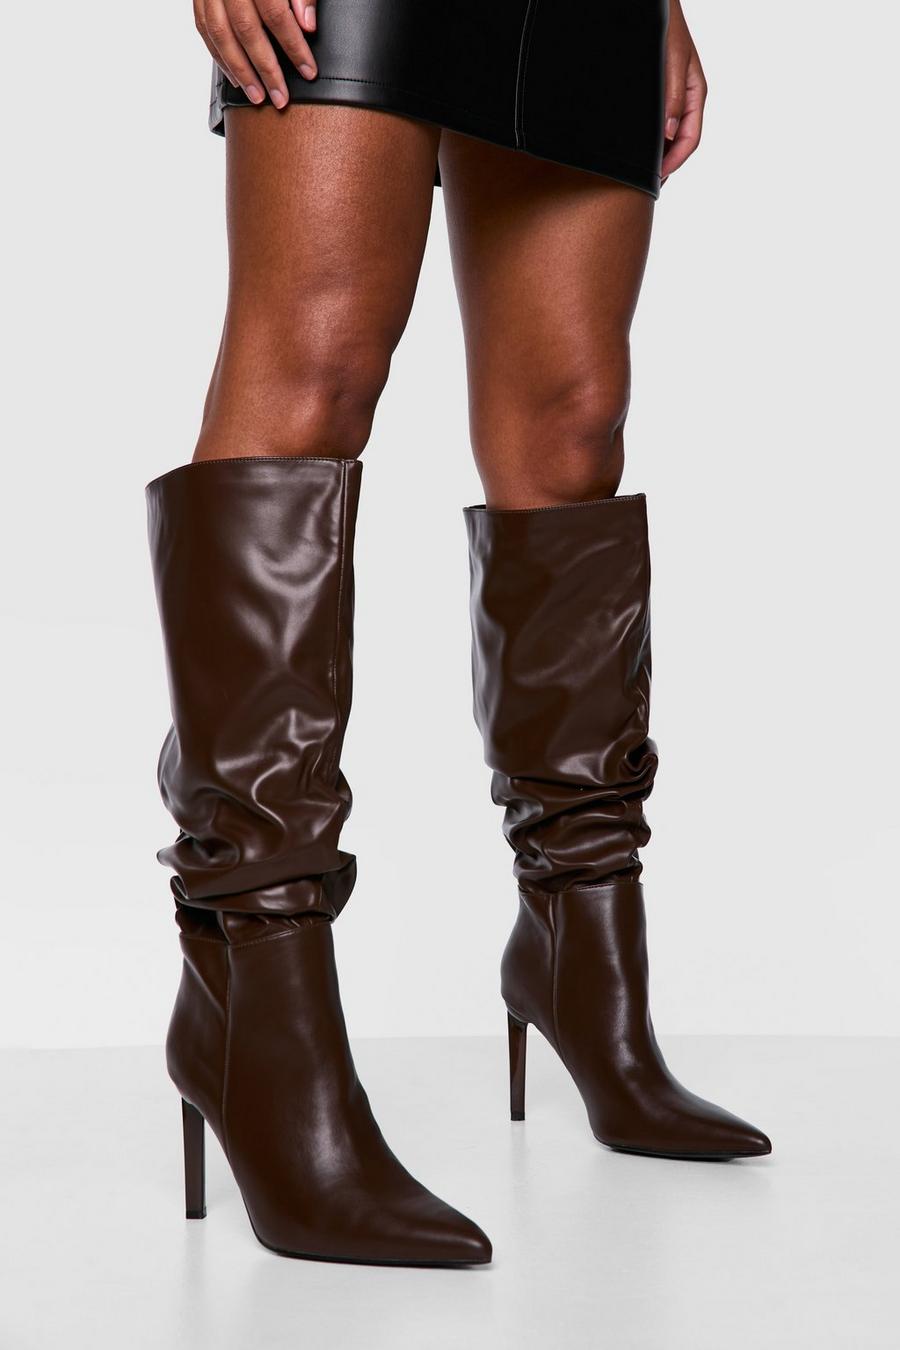 Chocolate Wide Width Ruched Stiletto Pointed Toe Boots